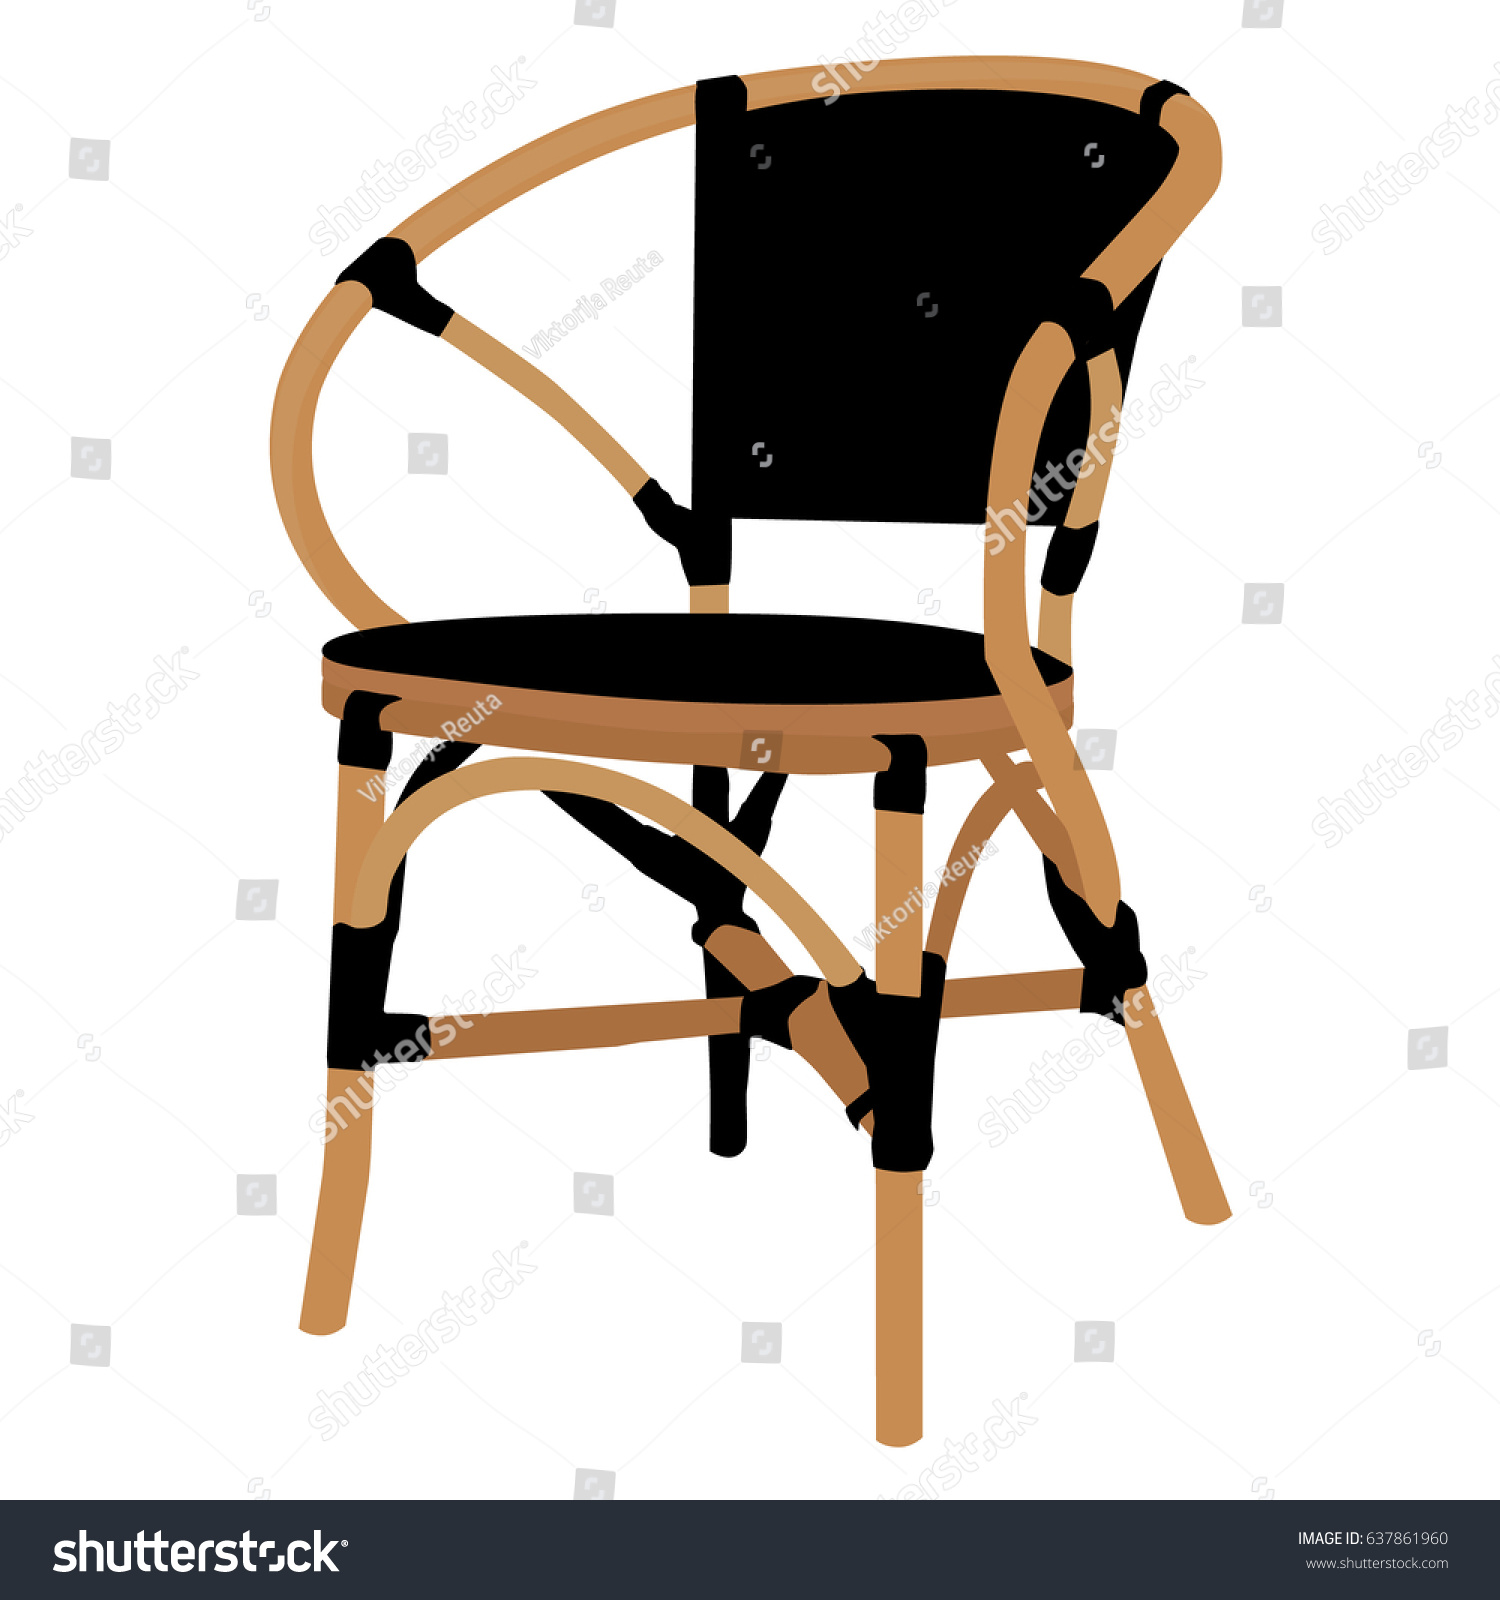 SVG of Vector illustration 3d isometric perspective bamboo chair design for cafe, restaurant. Natural furniture svg